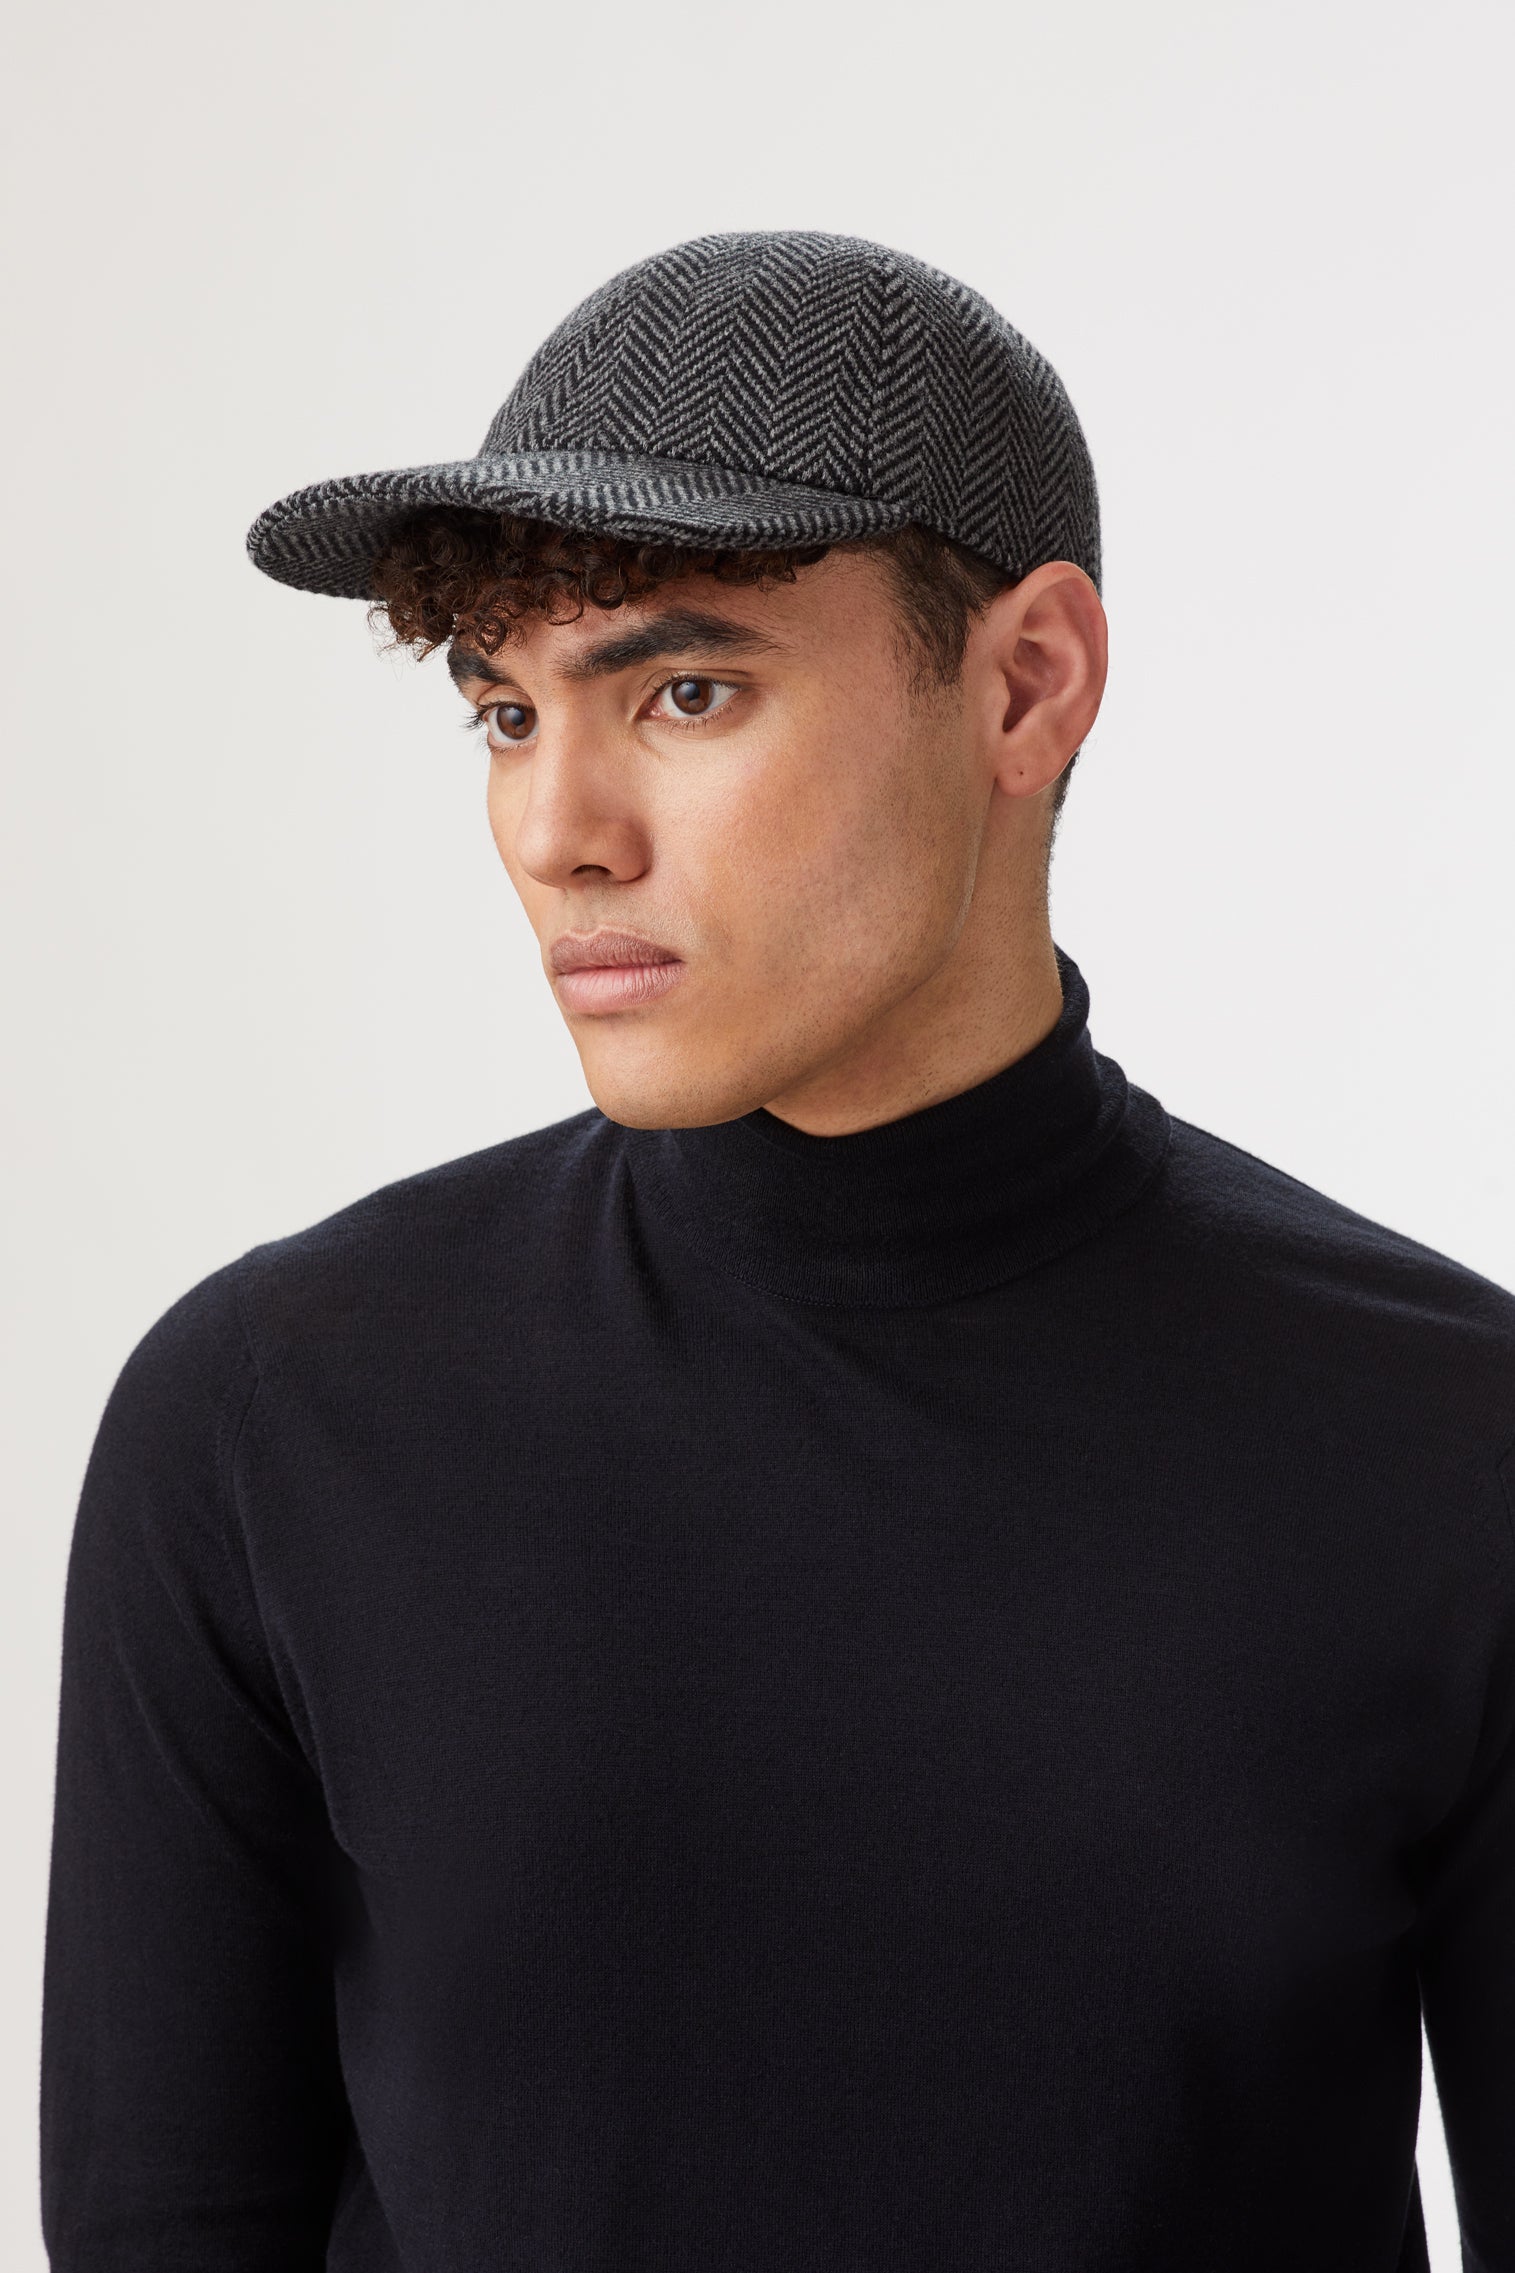 Escorial Wool Baseball Cap - Hats for Oval Face Shapes - Lock & Co. Hatters London UK